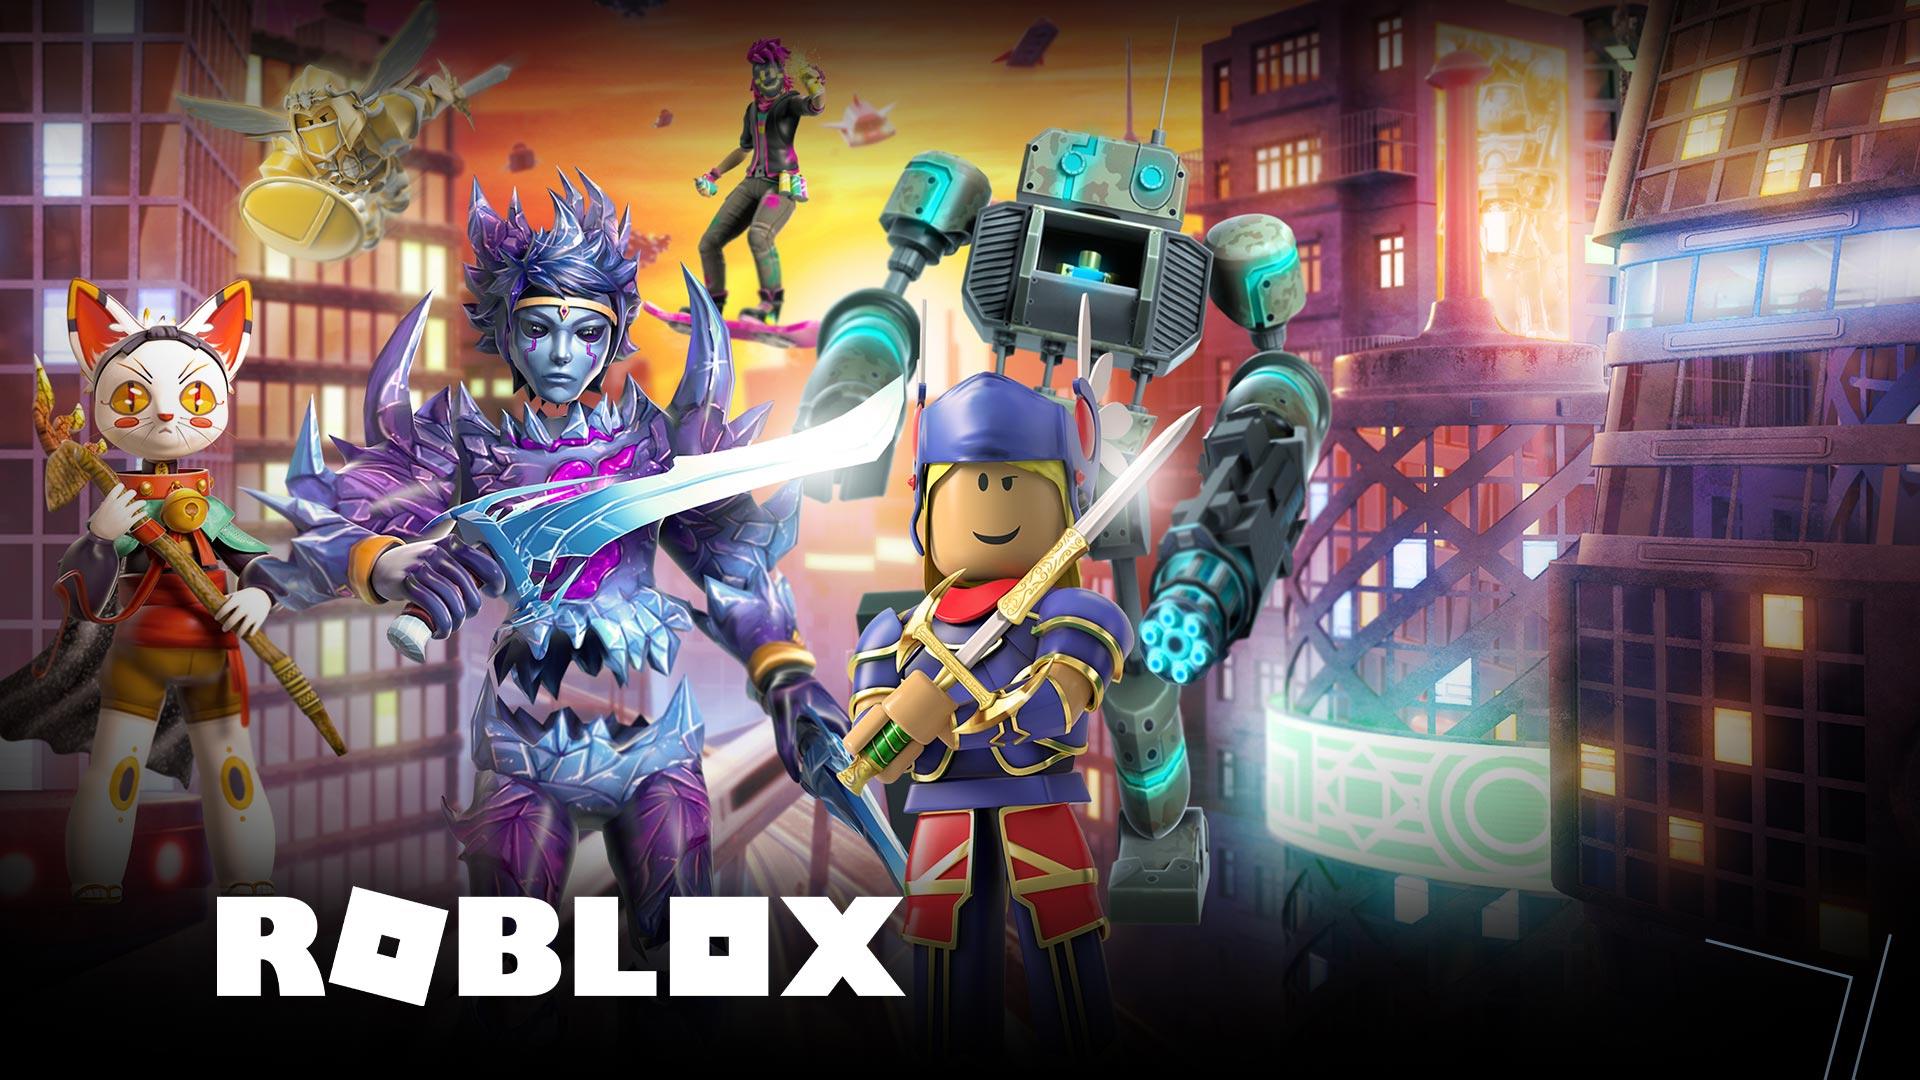 As Roblox continues to captivate audiences worldwide, the platform is continually evolving. But what is the danger surrounding Rule 34? Take a look.